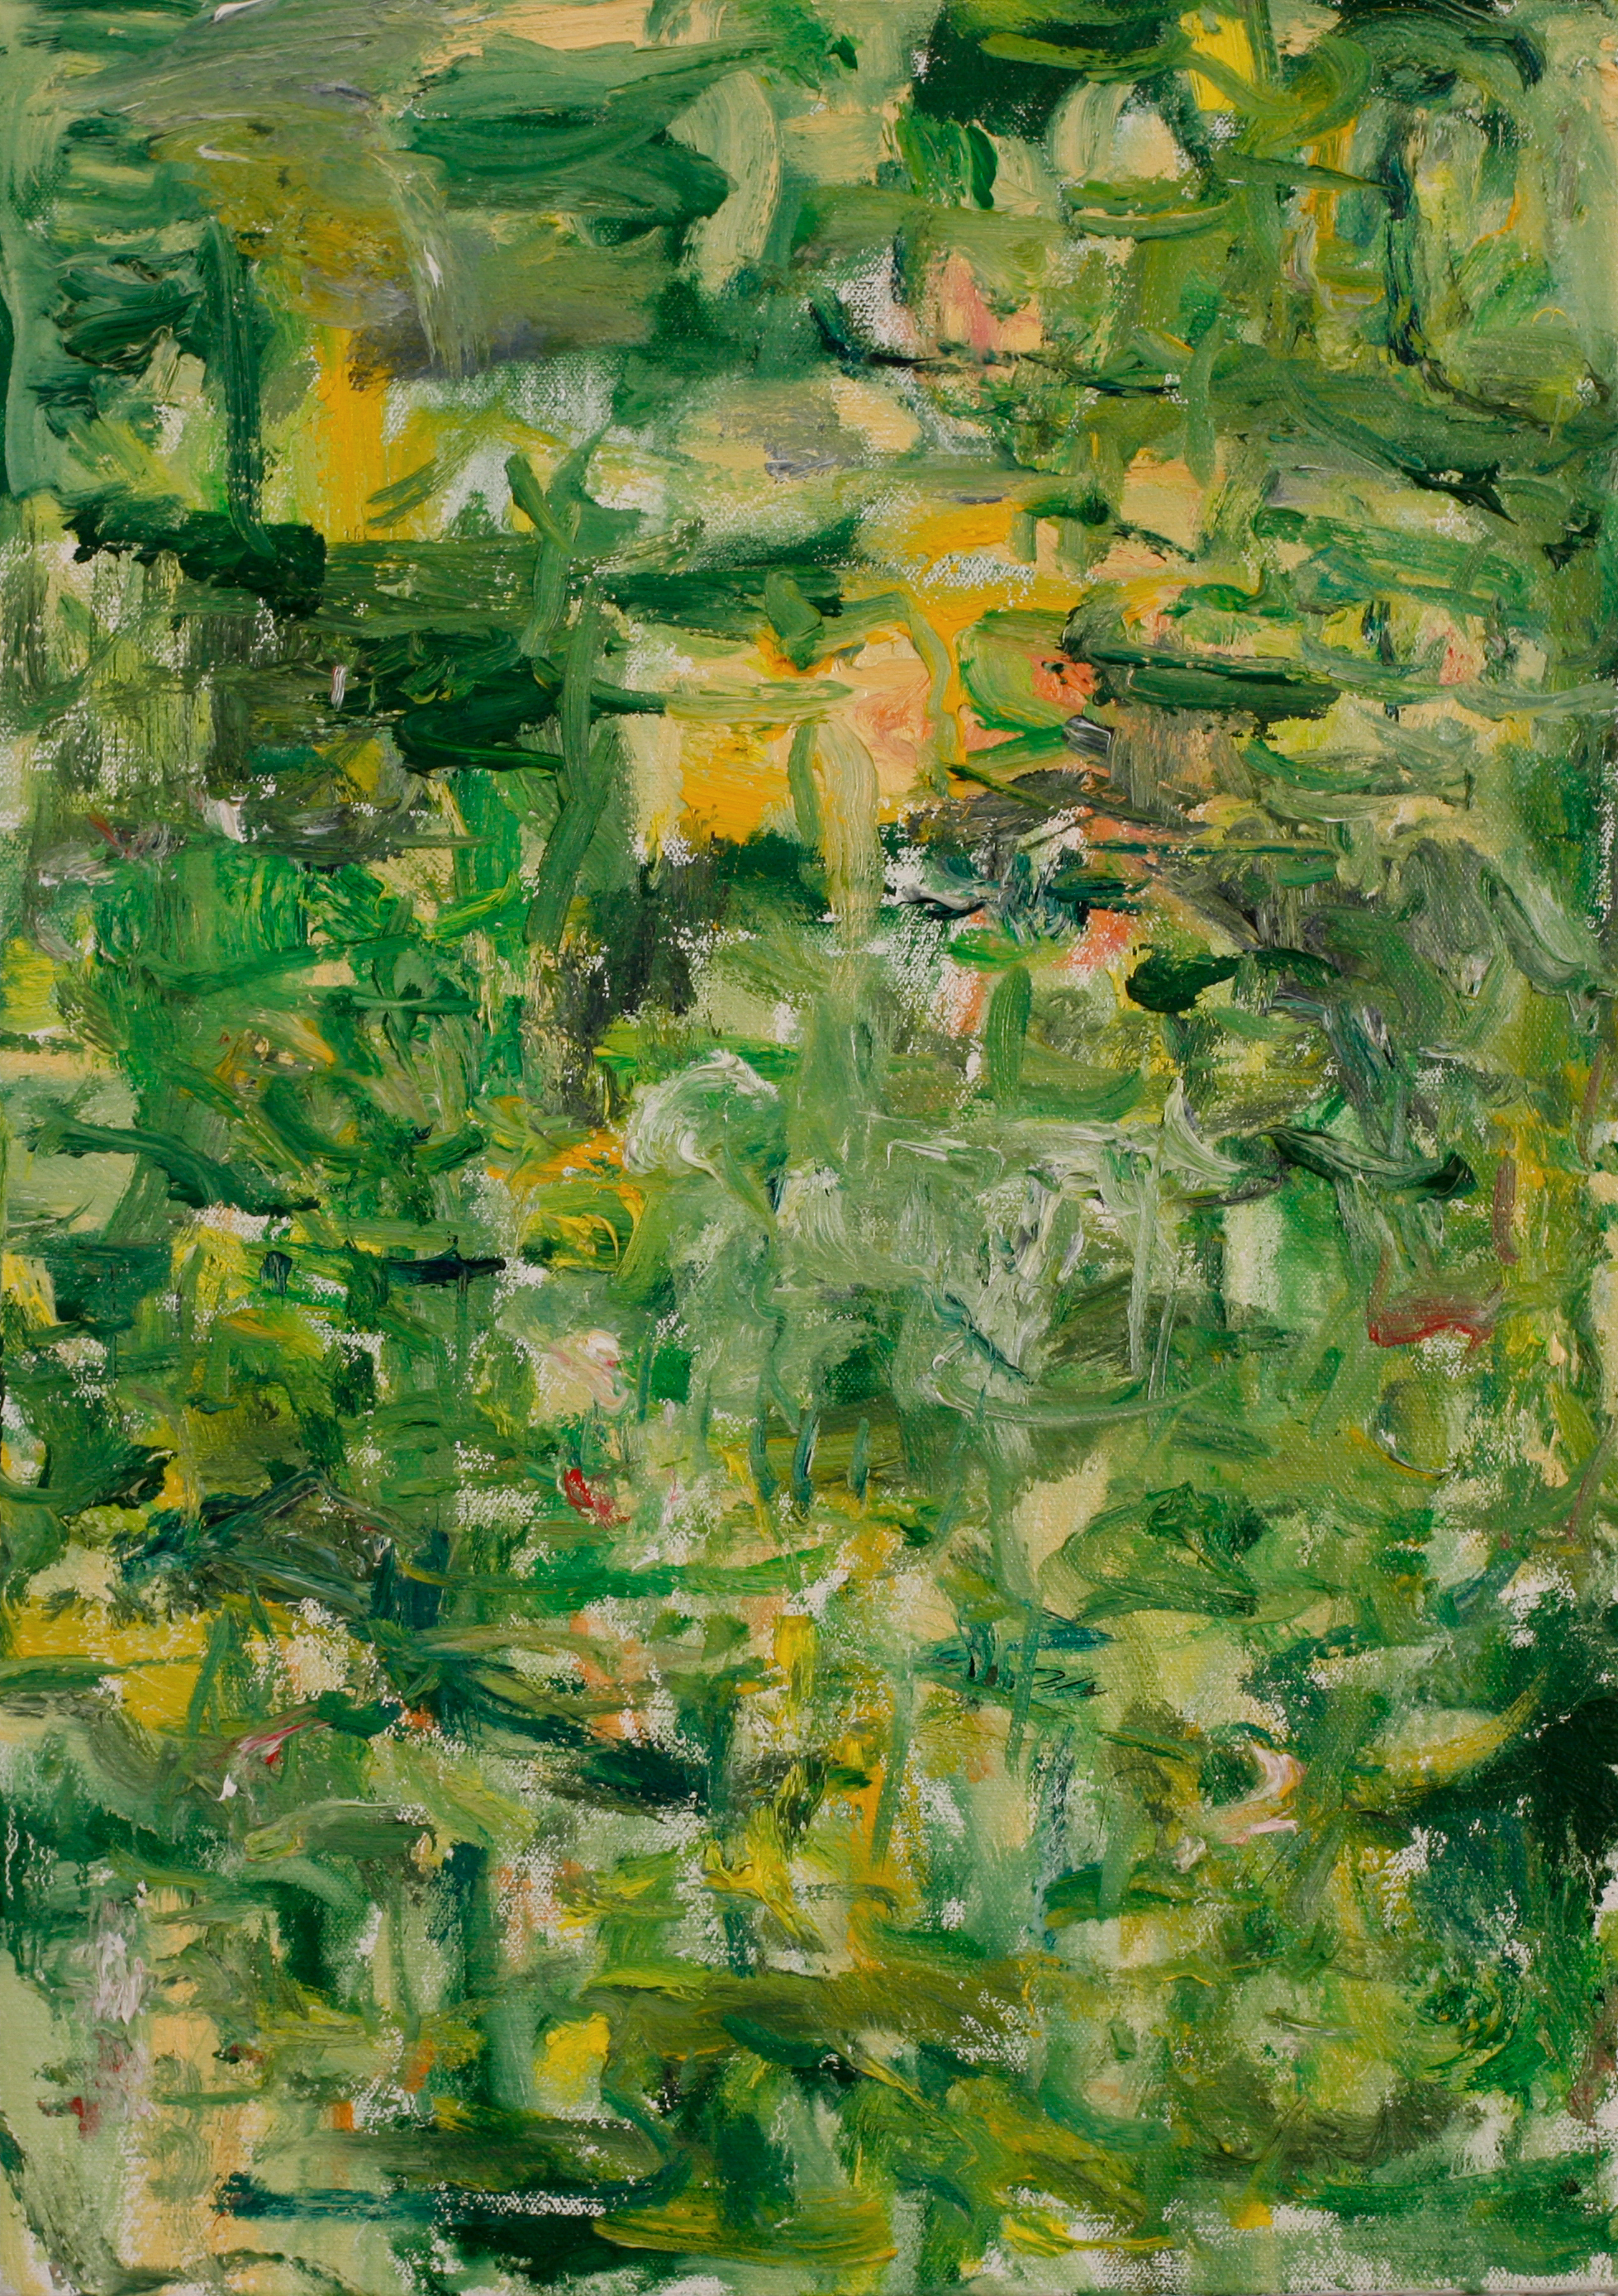 "Green City #81",  oil on canvas, 30"x 14", 